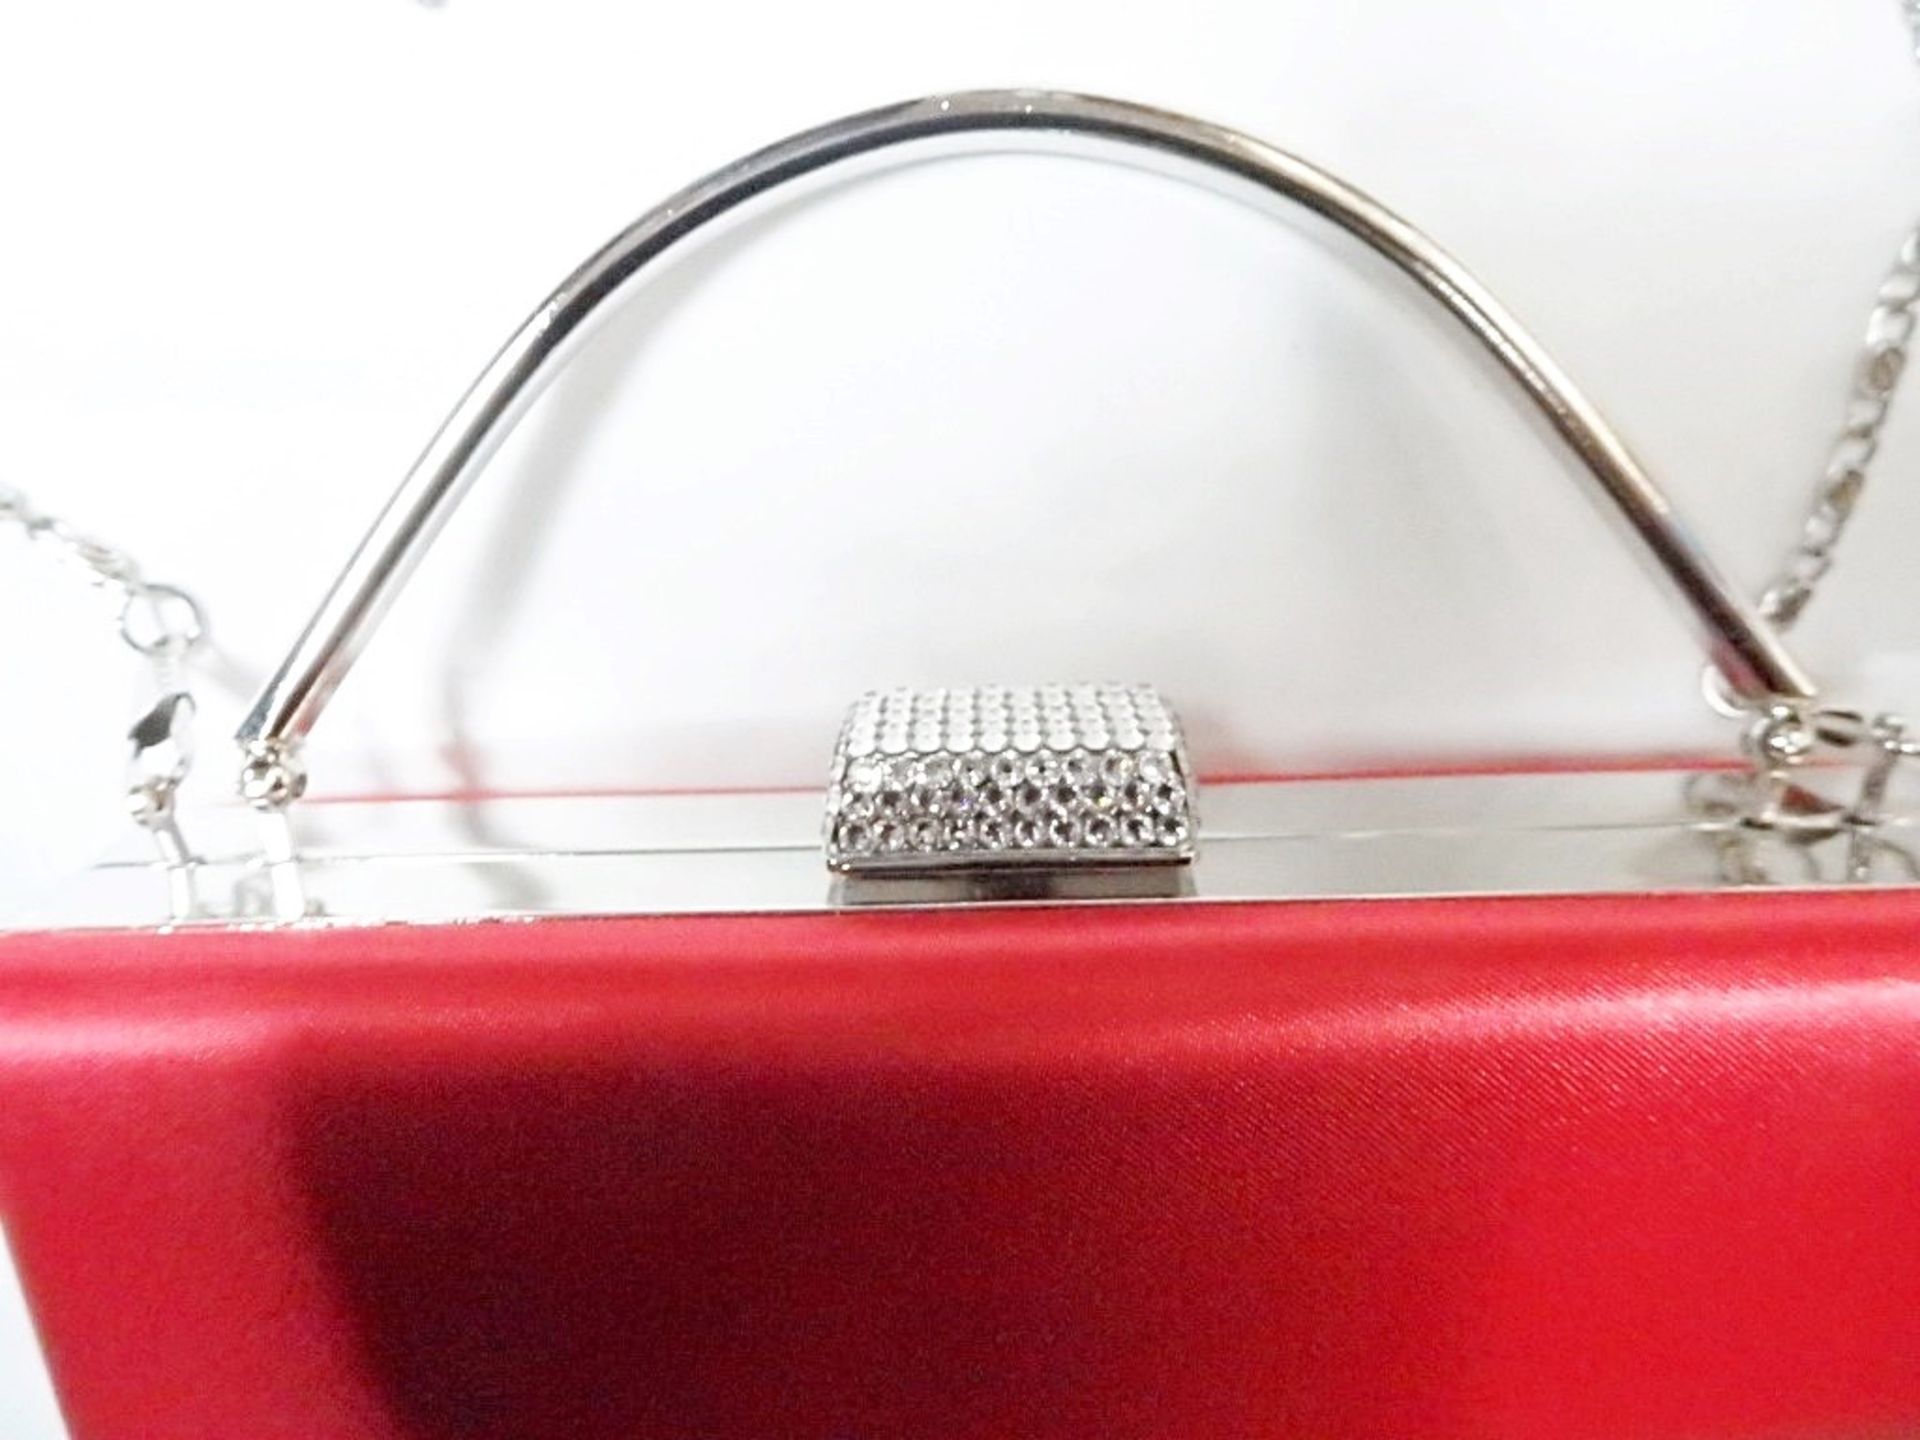 1 x Juliette Evening Bag By ICE London - New & Boxed - Ideal Gift - Colour: RED - CL042 - Ref: - Image 5 of 5